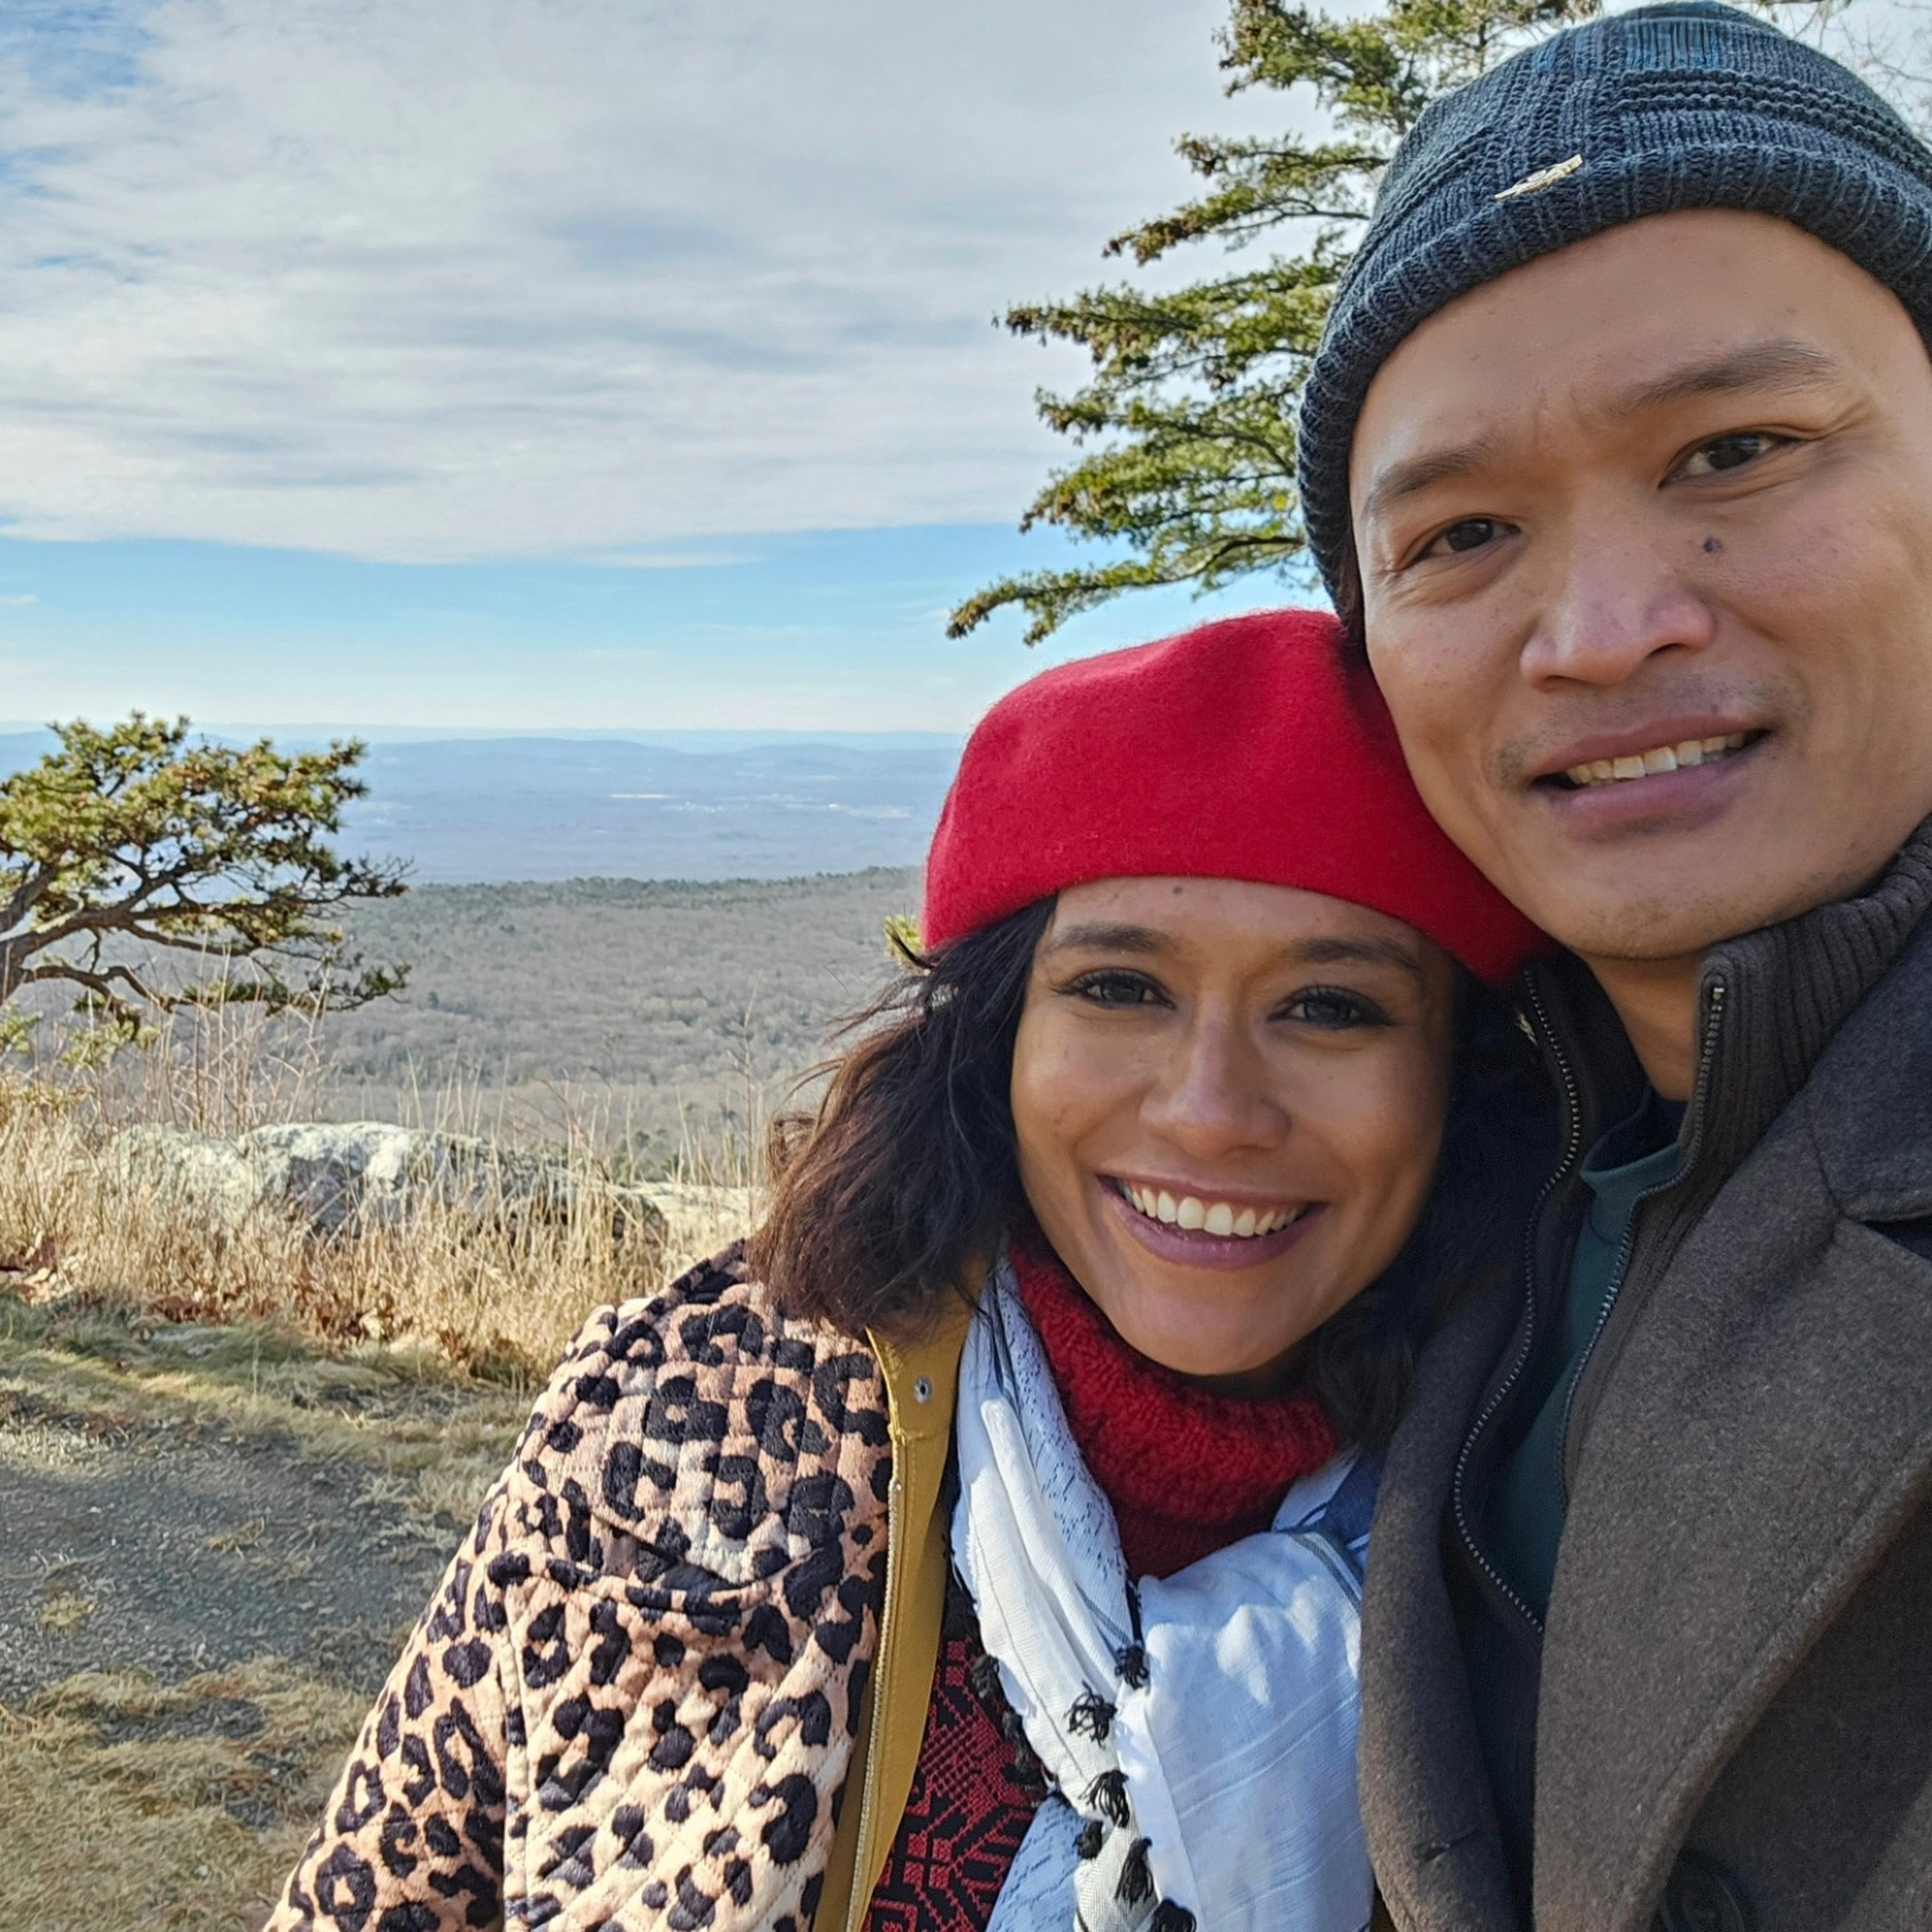 Nur Aisyah and bdul Rauf Mohd Said were enjoying the scenery at the Minnewaska State Park Preserve when the accident happened. Photo: Facebook/Rauf Said